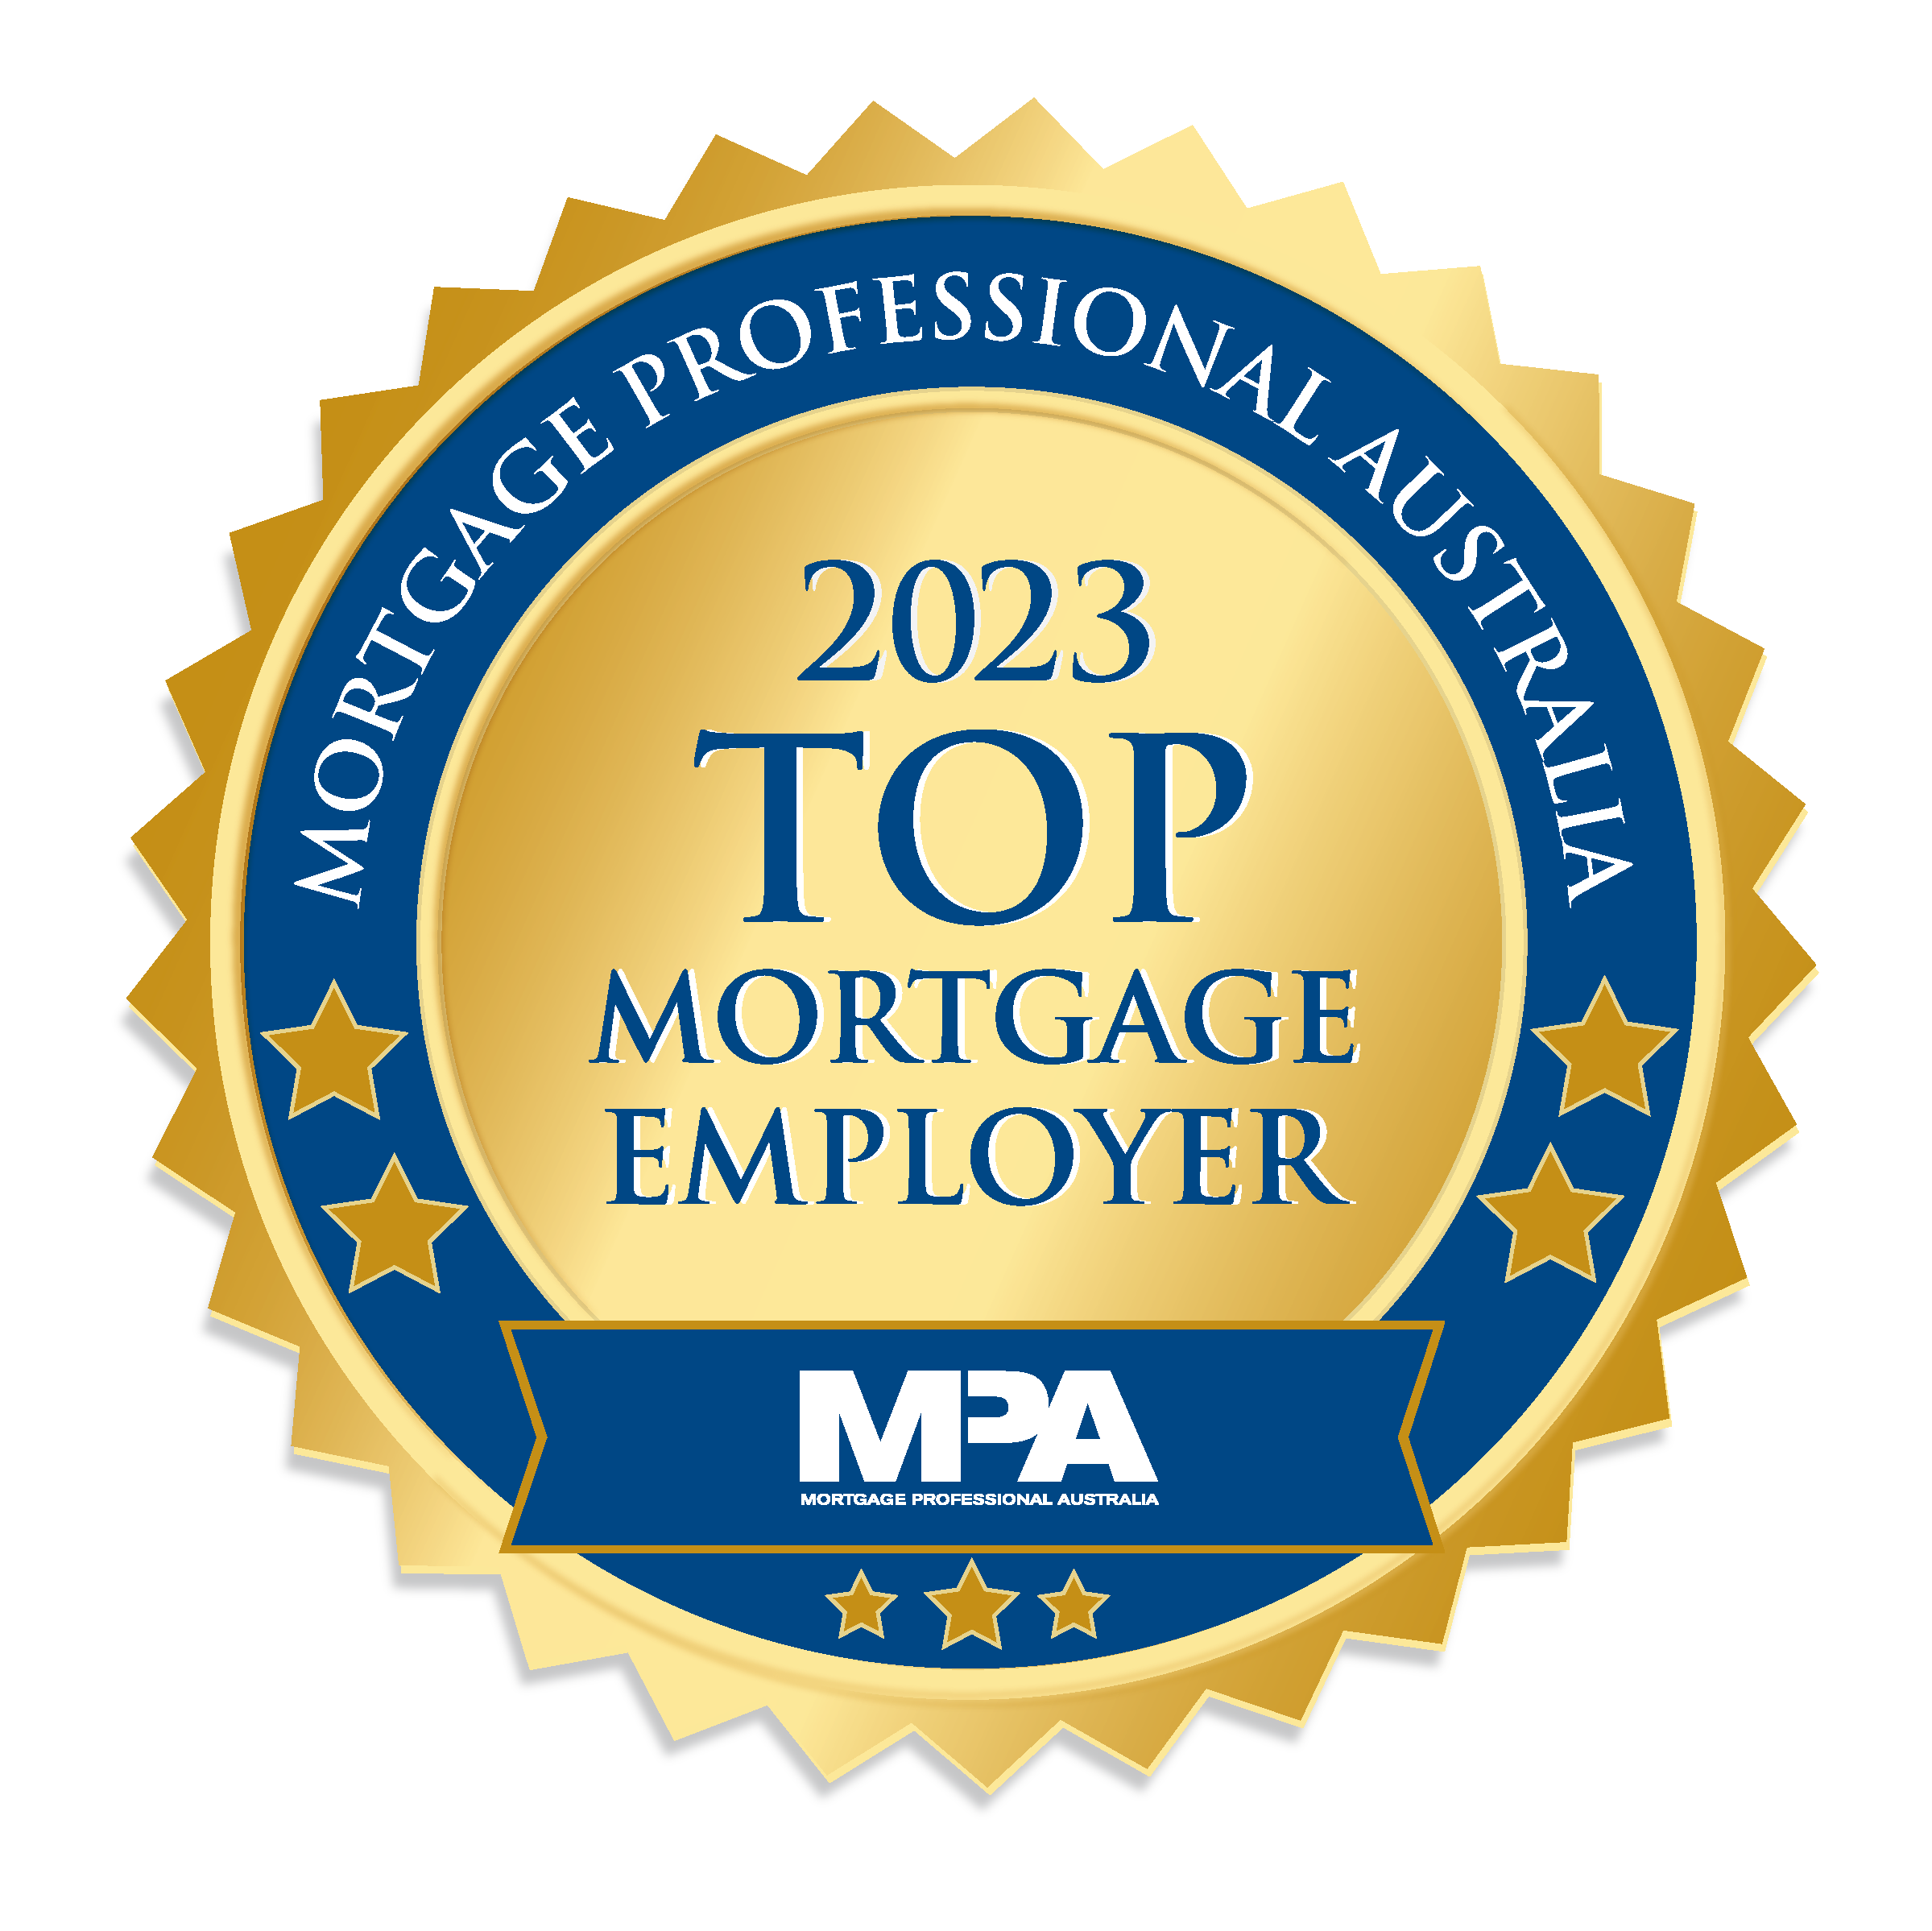 Mpa Top Mortgage Employer 2023